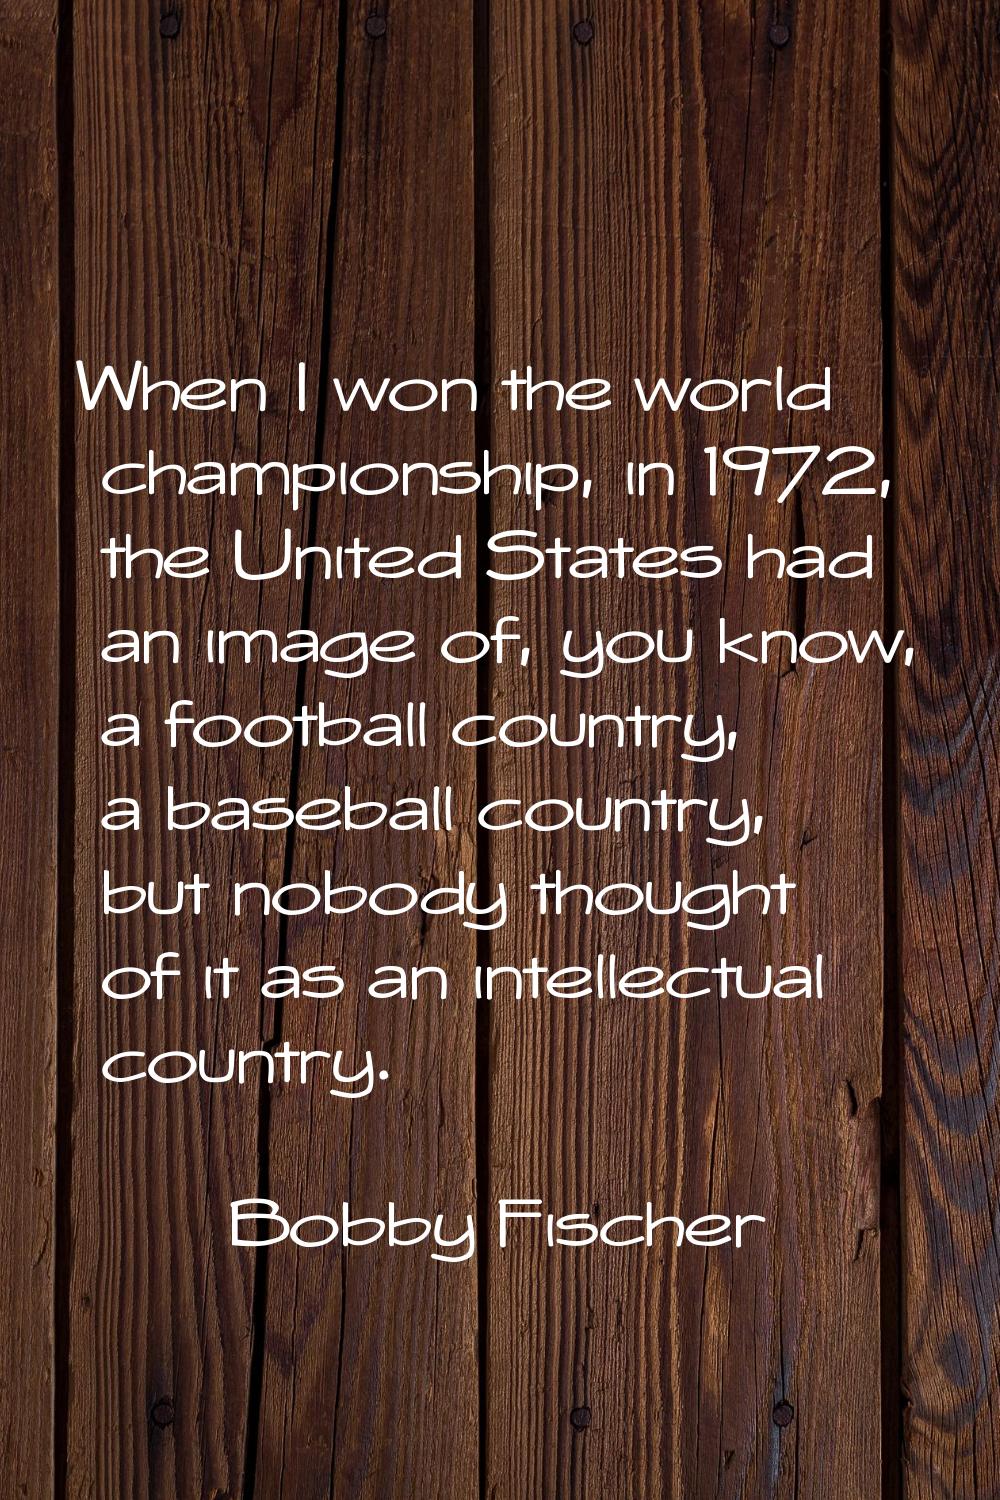 When I won the world championship, in 1972, the United States had an image of, you know, a football